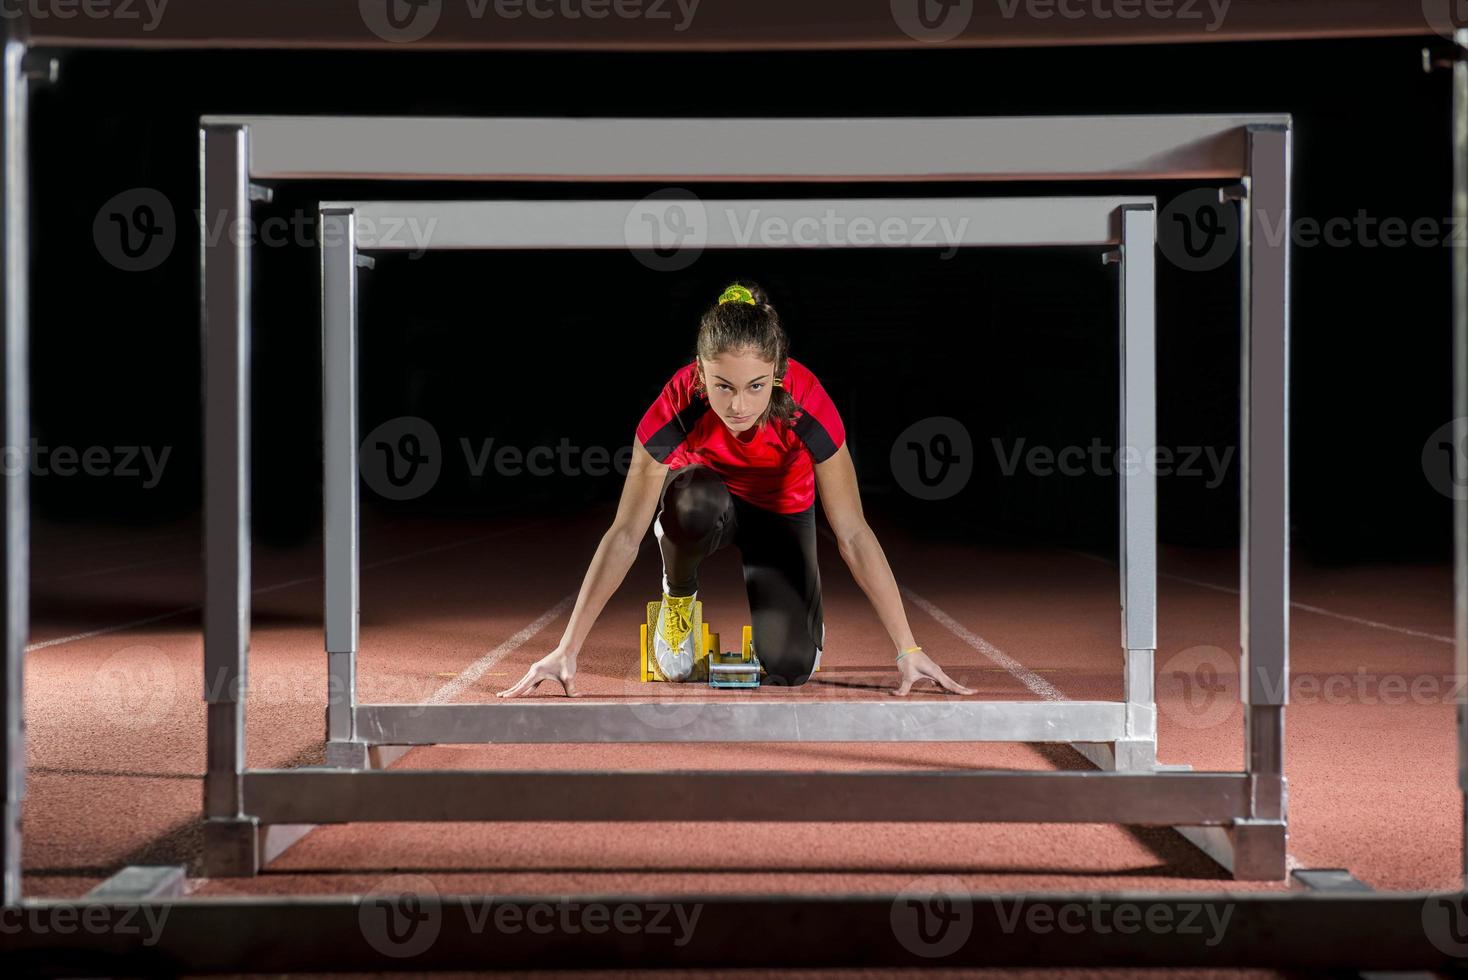 Athlete on the starting blocks with hurdles photo